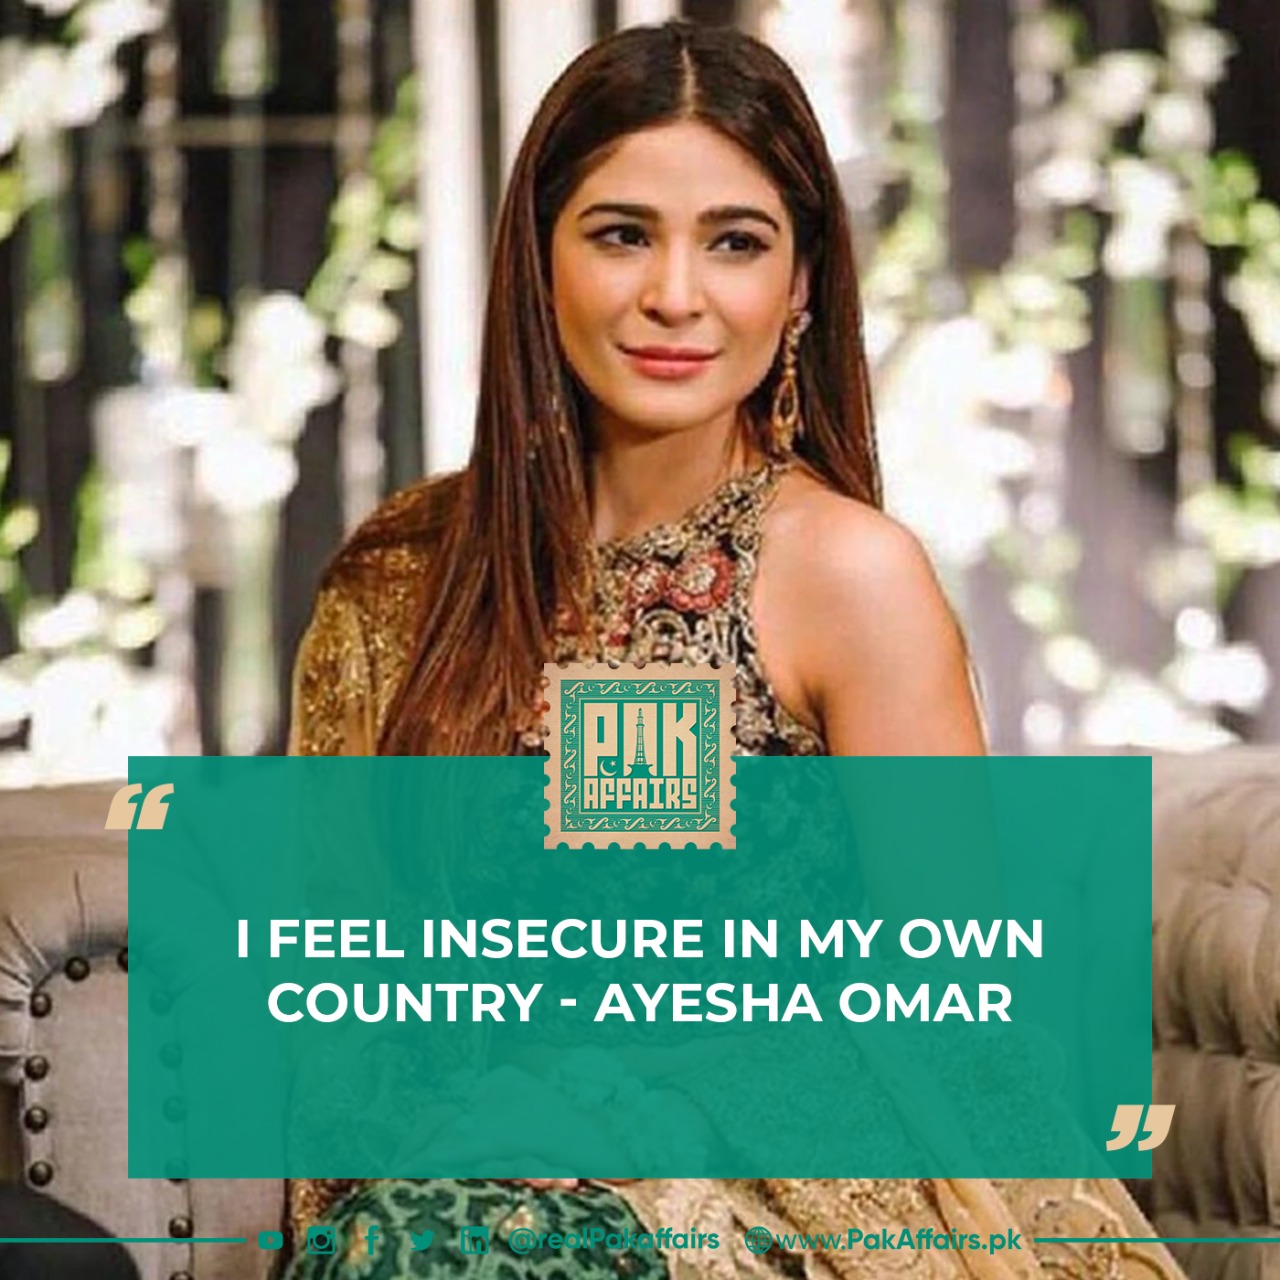 I feel insecure in my own country, Ayesha Omar.